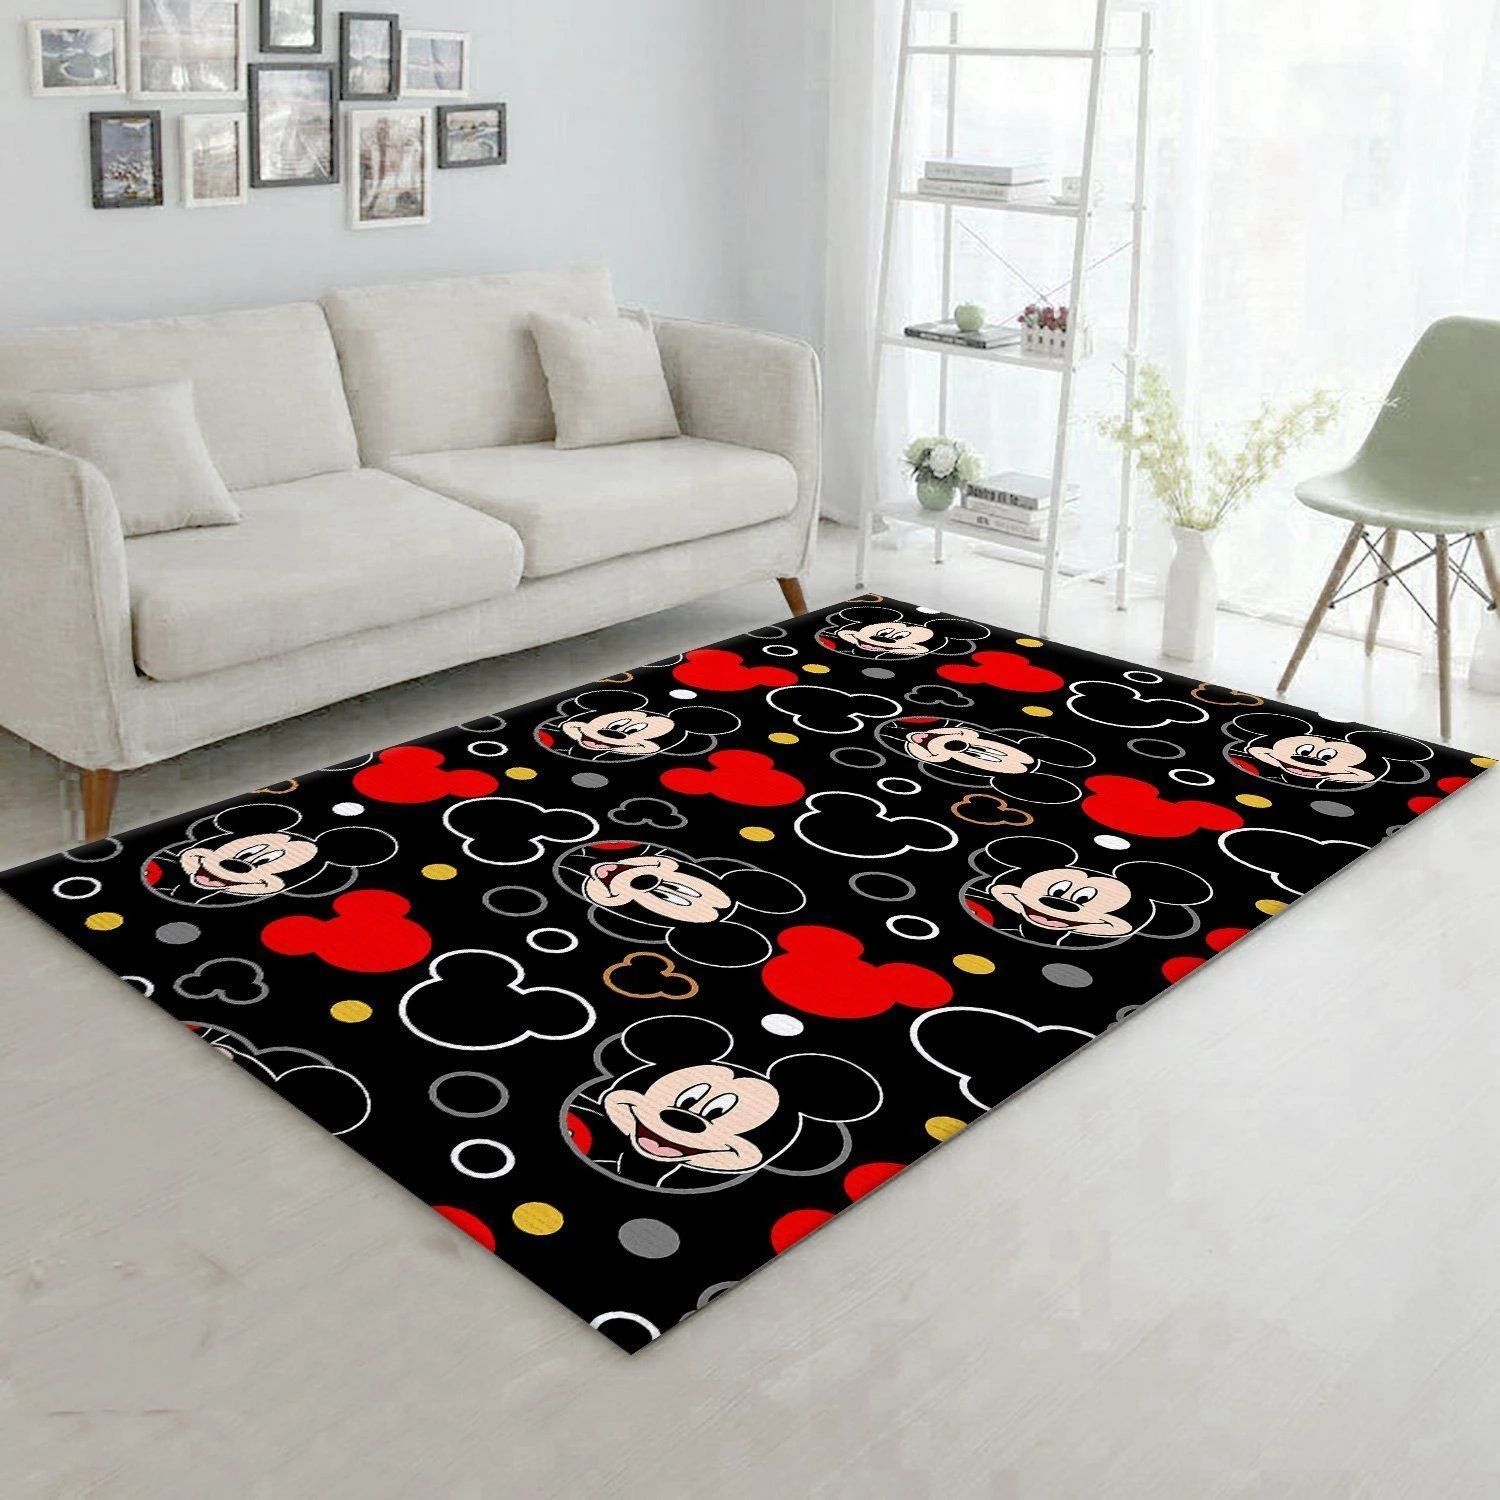 Mickey mouse area rugs living room carpet mm71201 local brands floor decor the us decor - indoor outdoor rugs - large ( 5 x 8 ft )